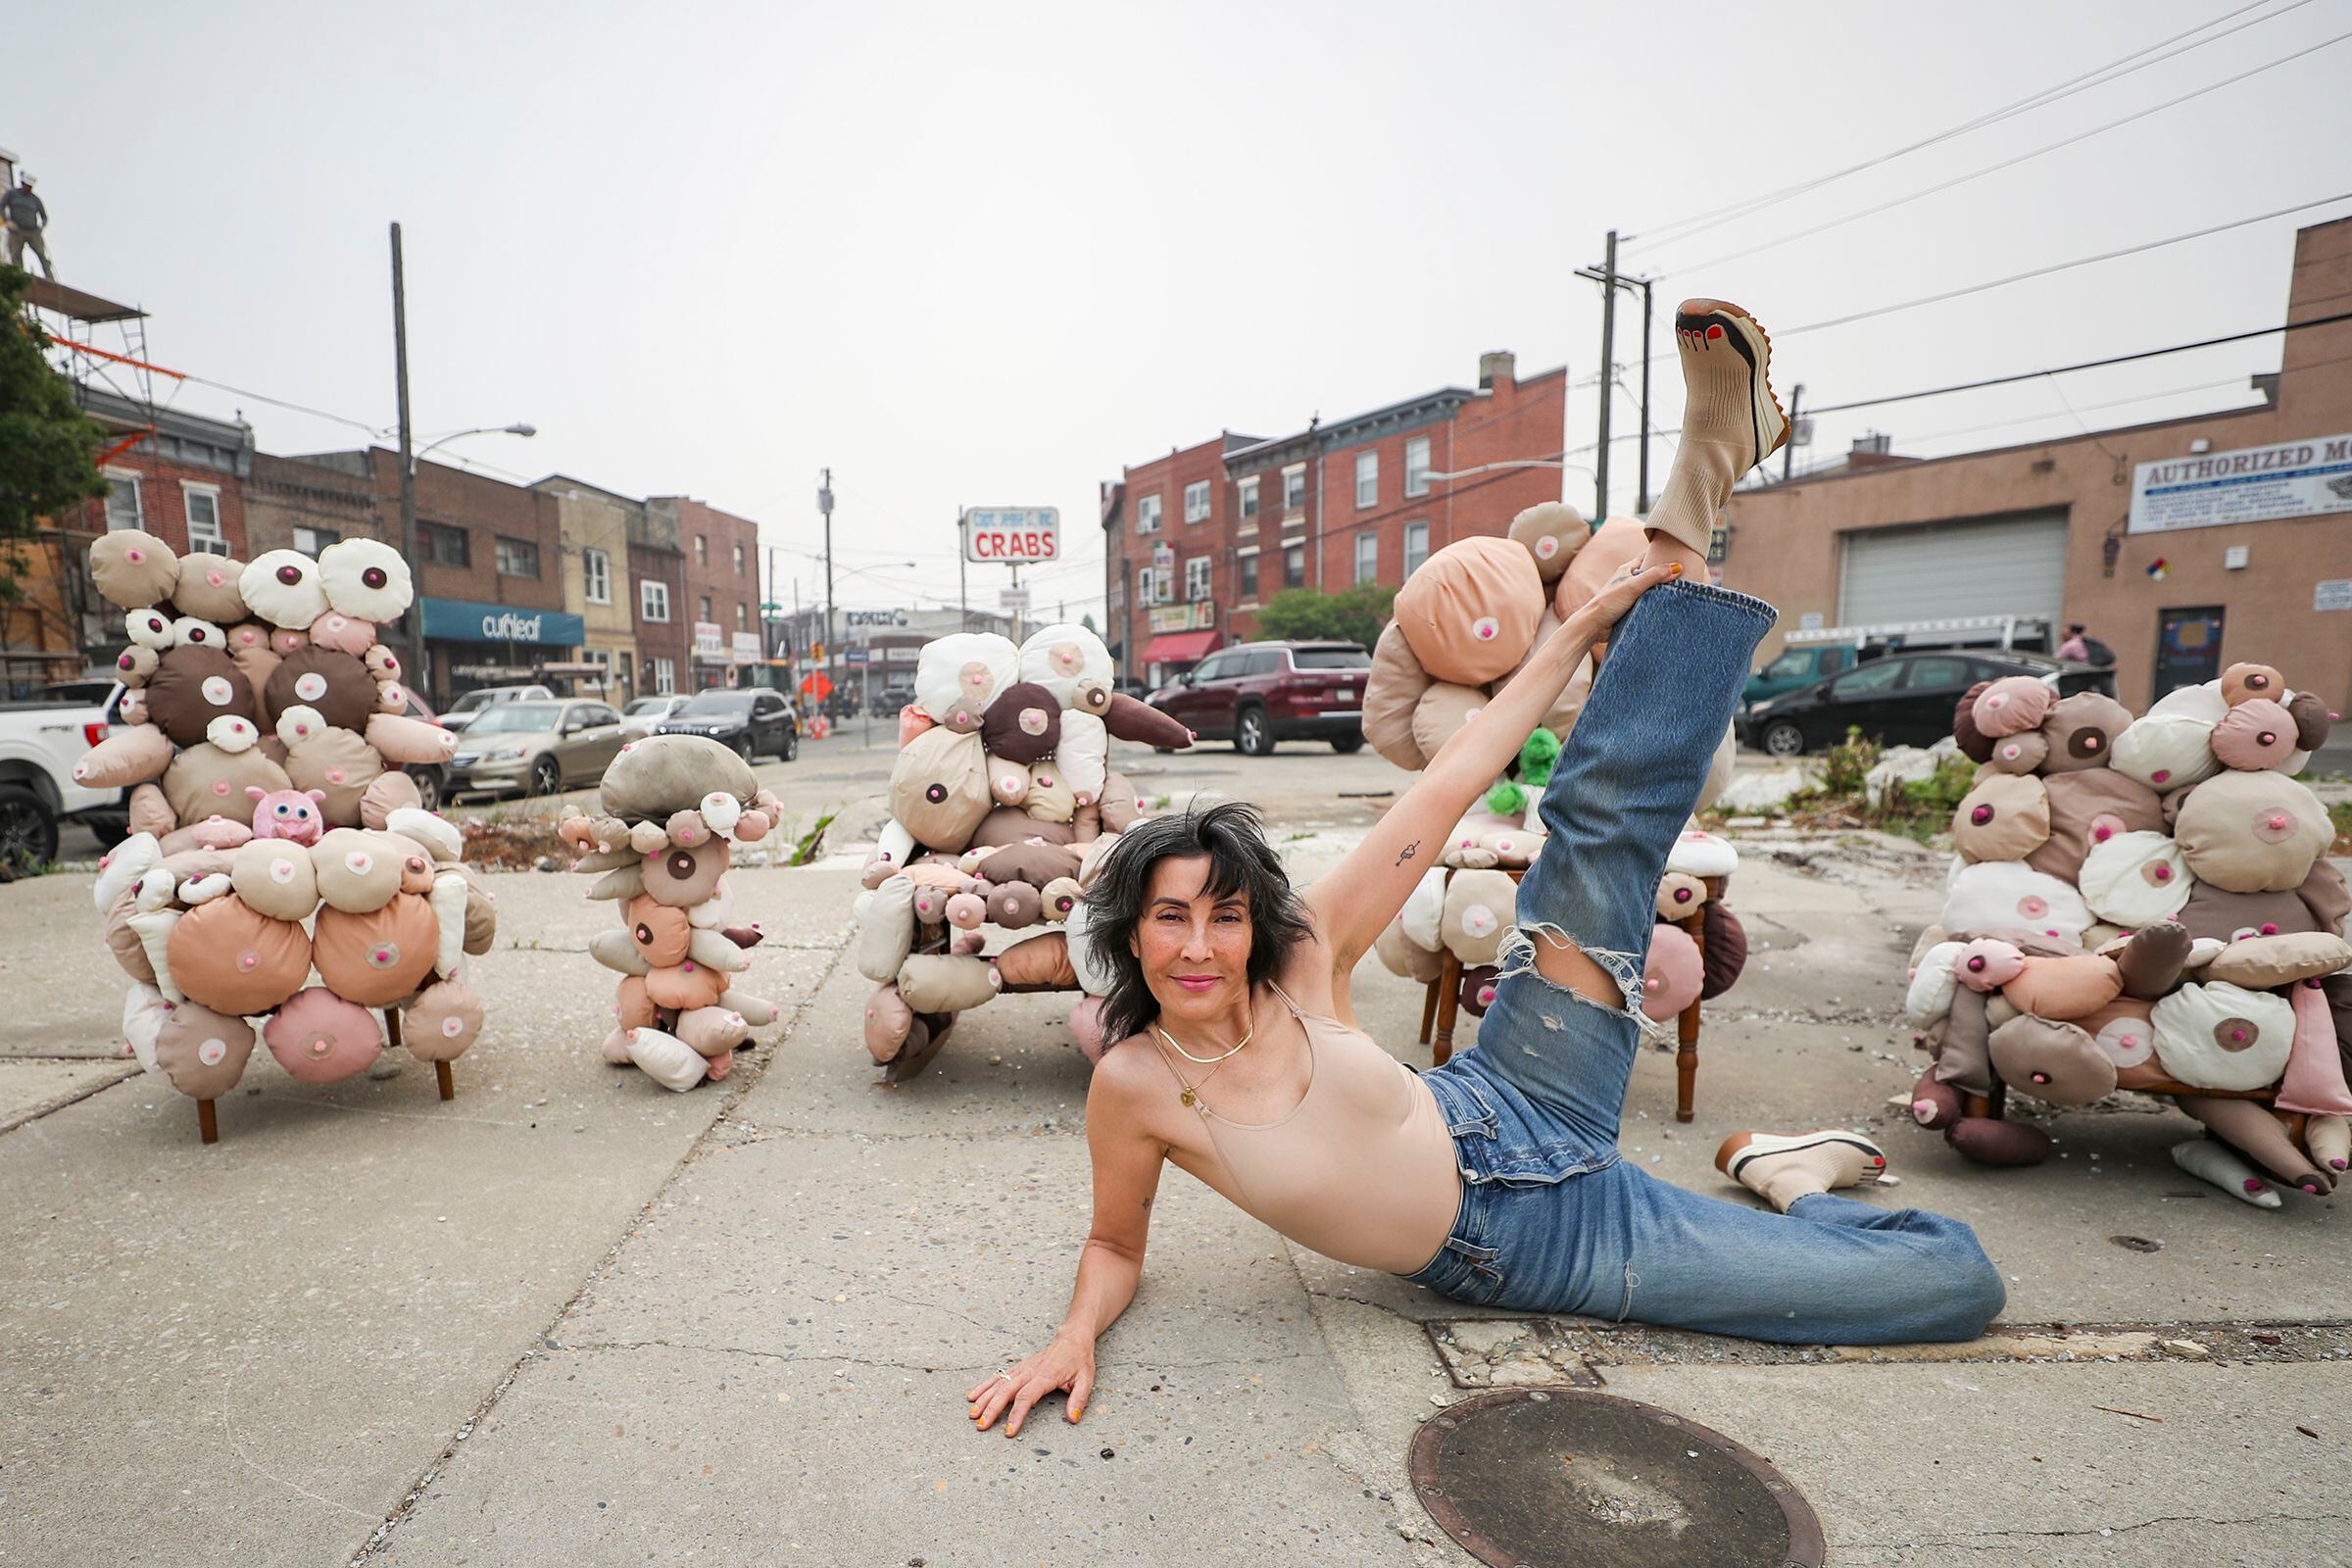 Her 'Boob Garden' sculpture in an empty South Philly lot delights